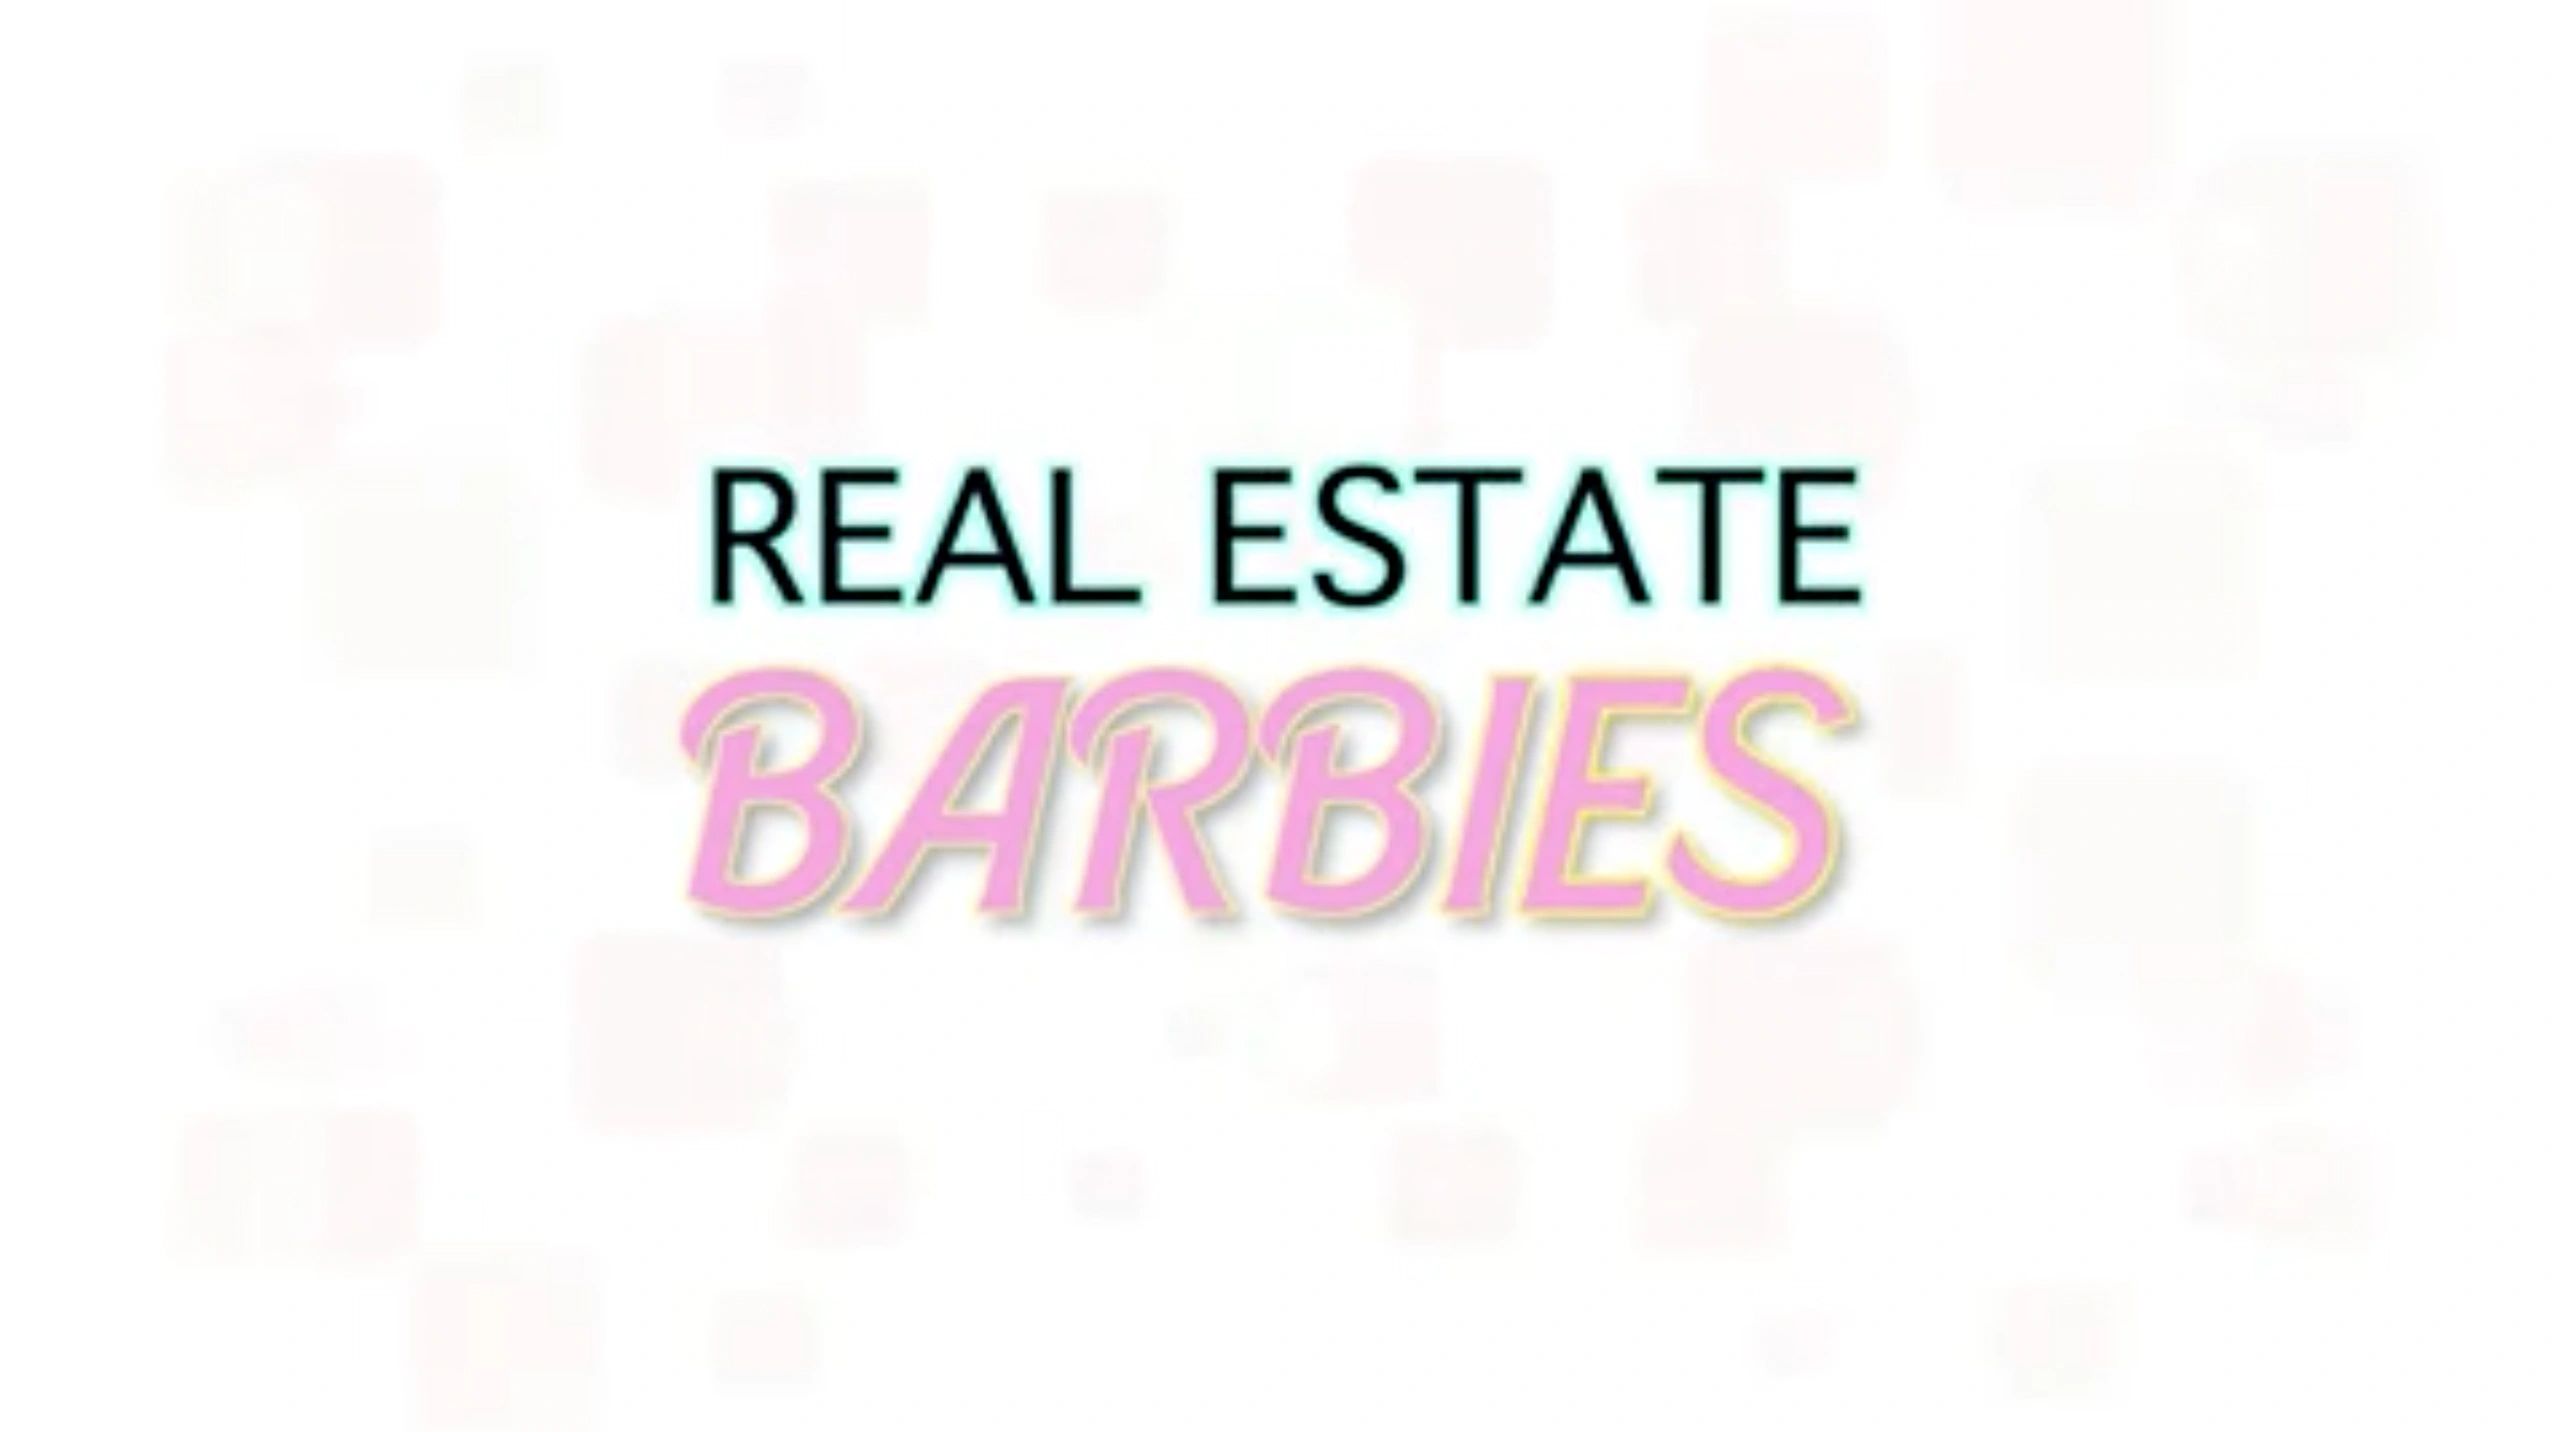 Television, HGTV, video Production, Film, Commercials, House8 Media, Real Estate Barbies, We TV